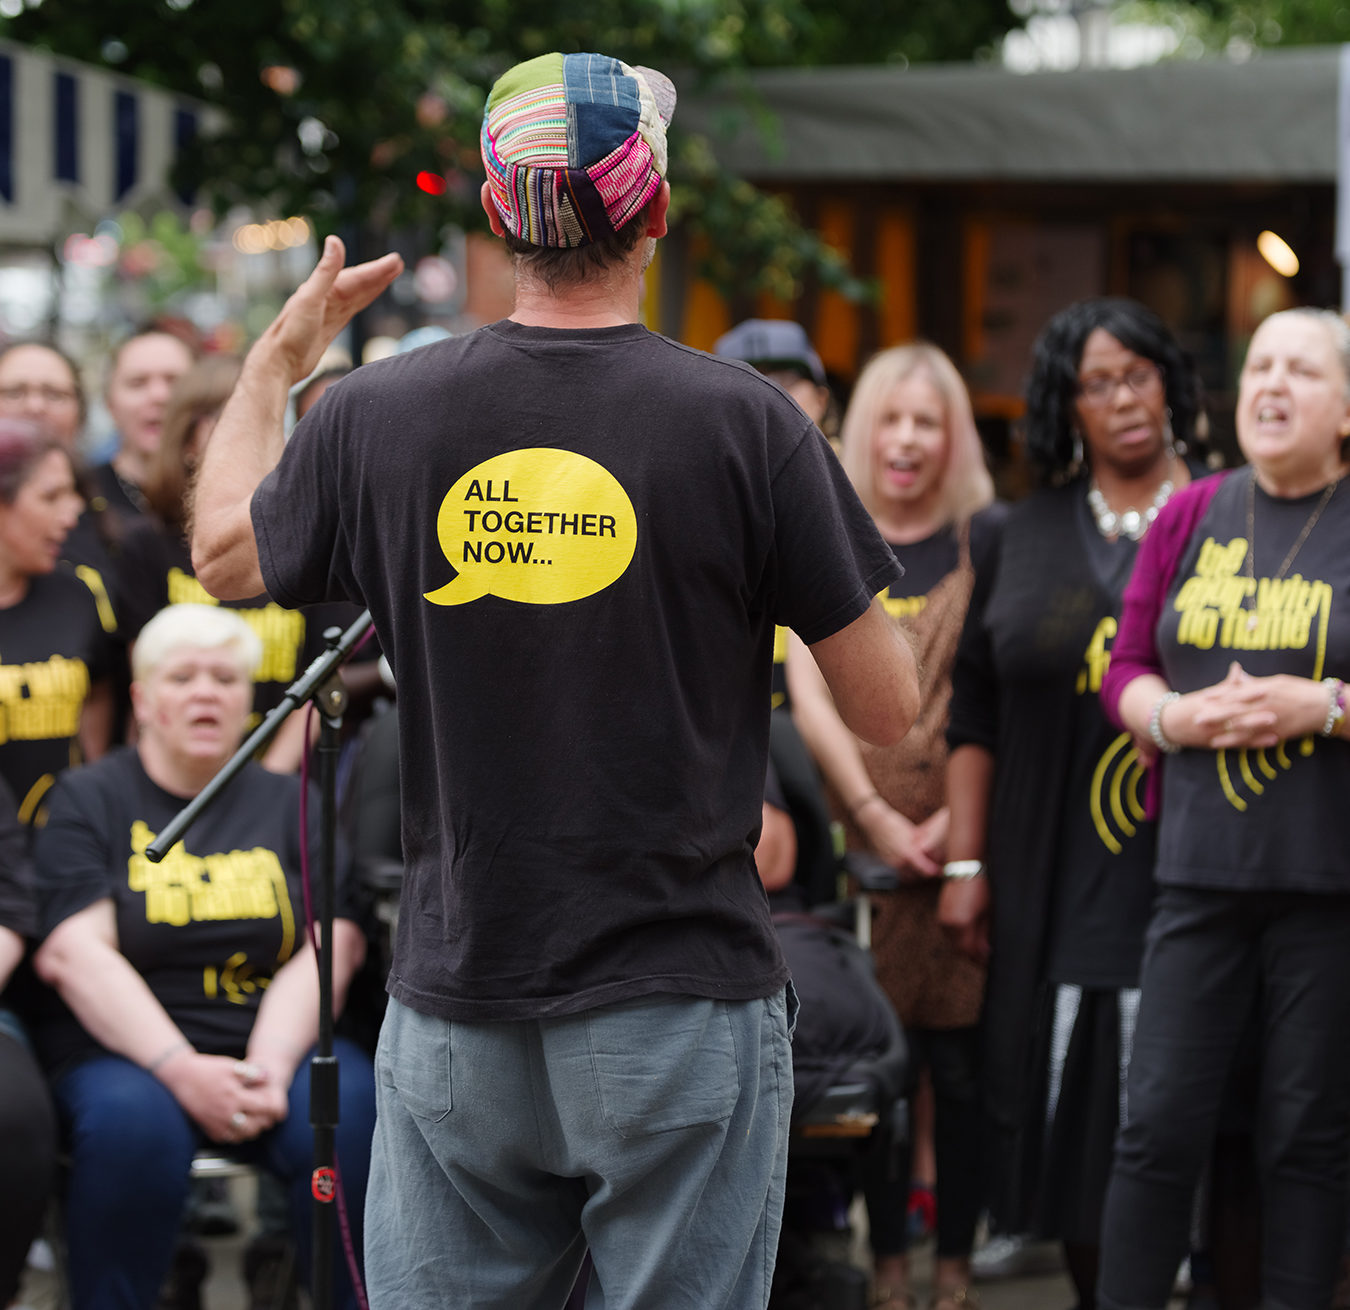 A choir made up of a range of people of different ages and ethnicities. They are wearing t-shirts with The Choir with No Name on. A man is standing in front of them with his back to the camera wearing a black t-shirt with All Together Now on the back.